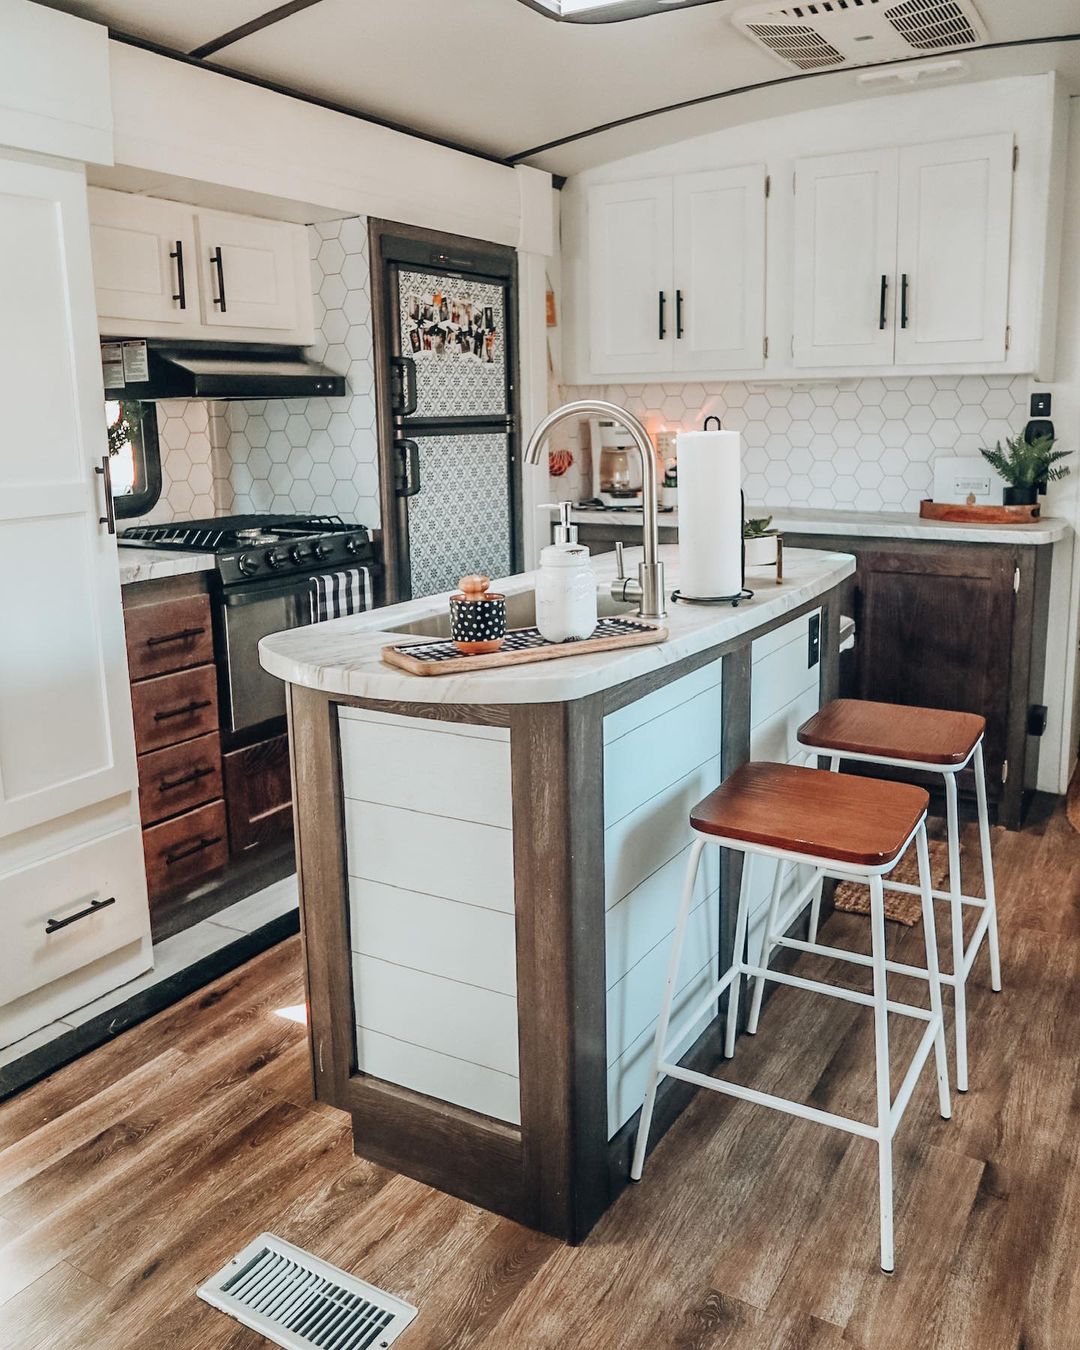 RV kitchen showing bar stools behind the kitchen island as seating solutions. Photo by Instagram user @simplecatlady.